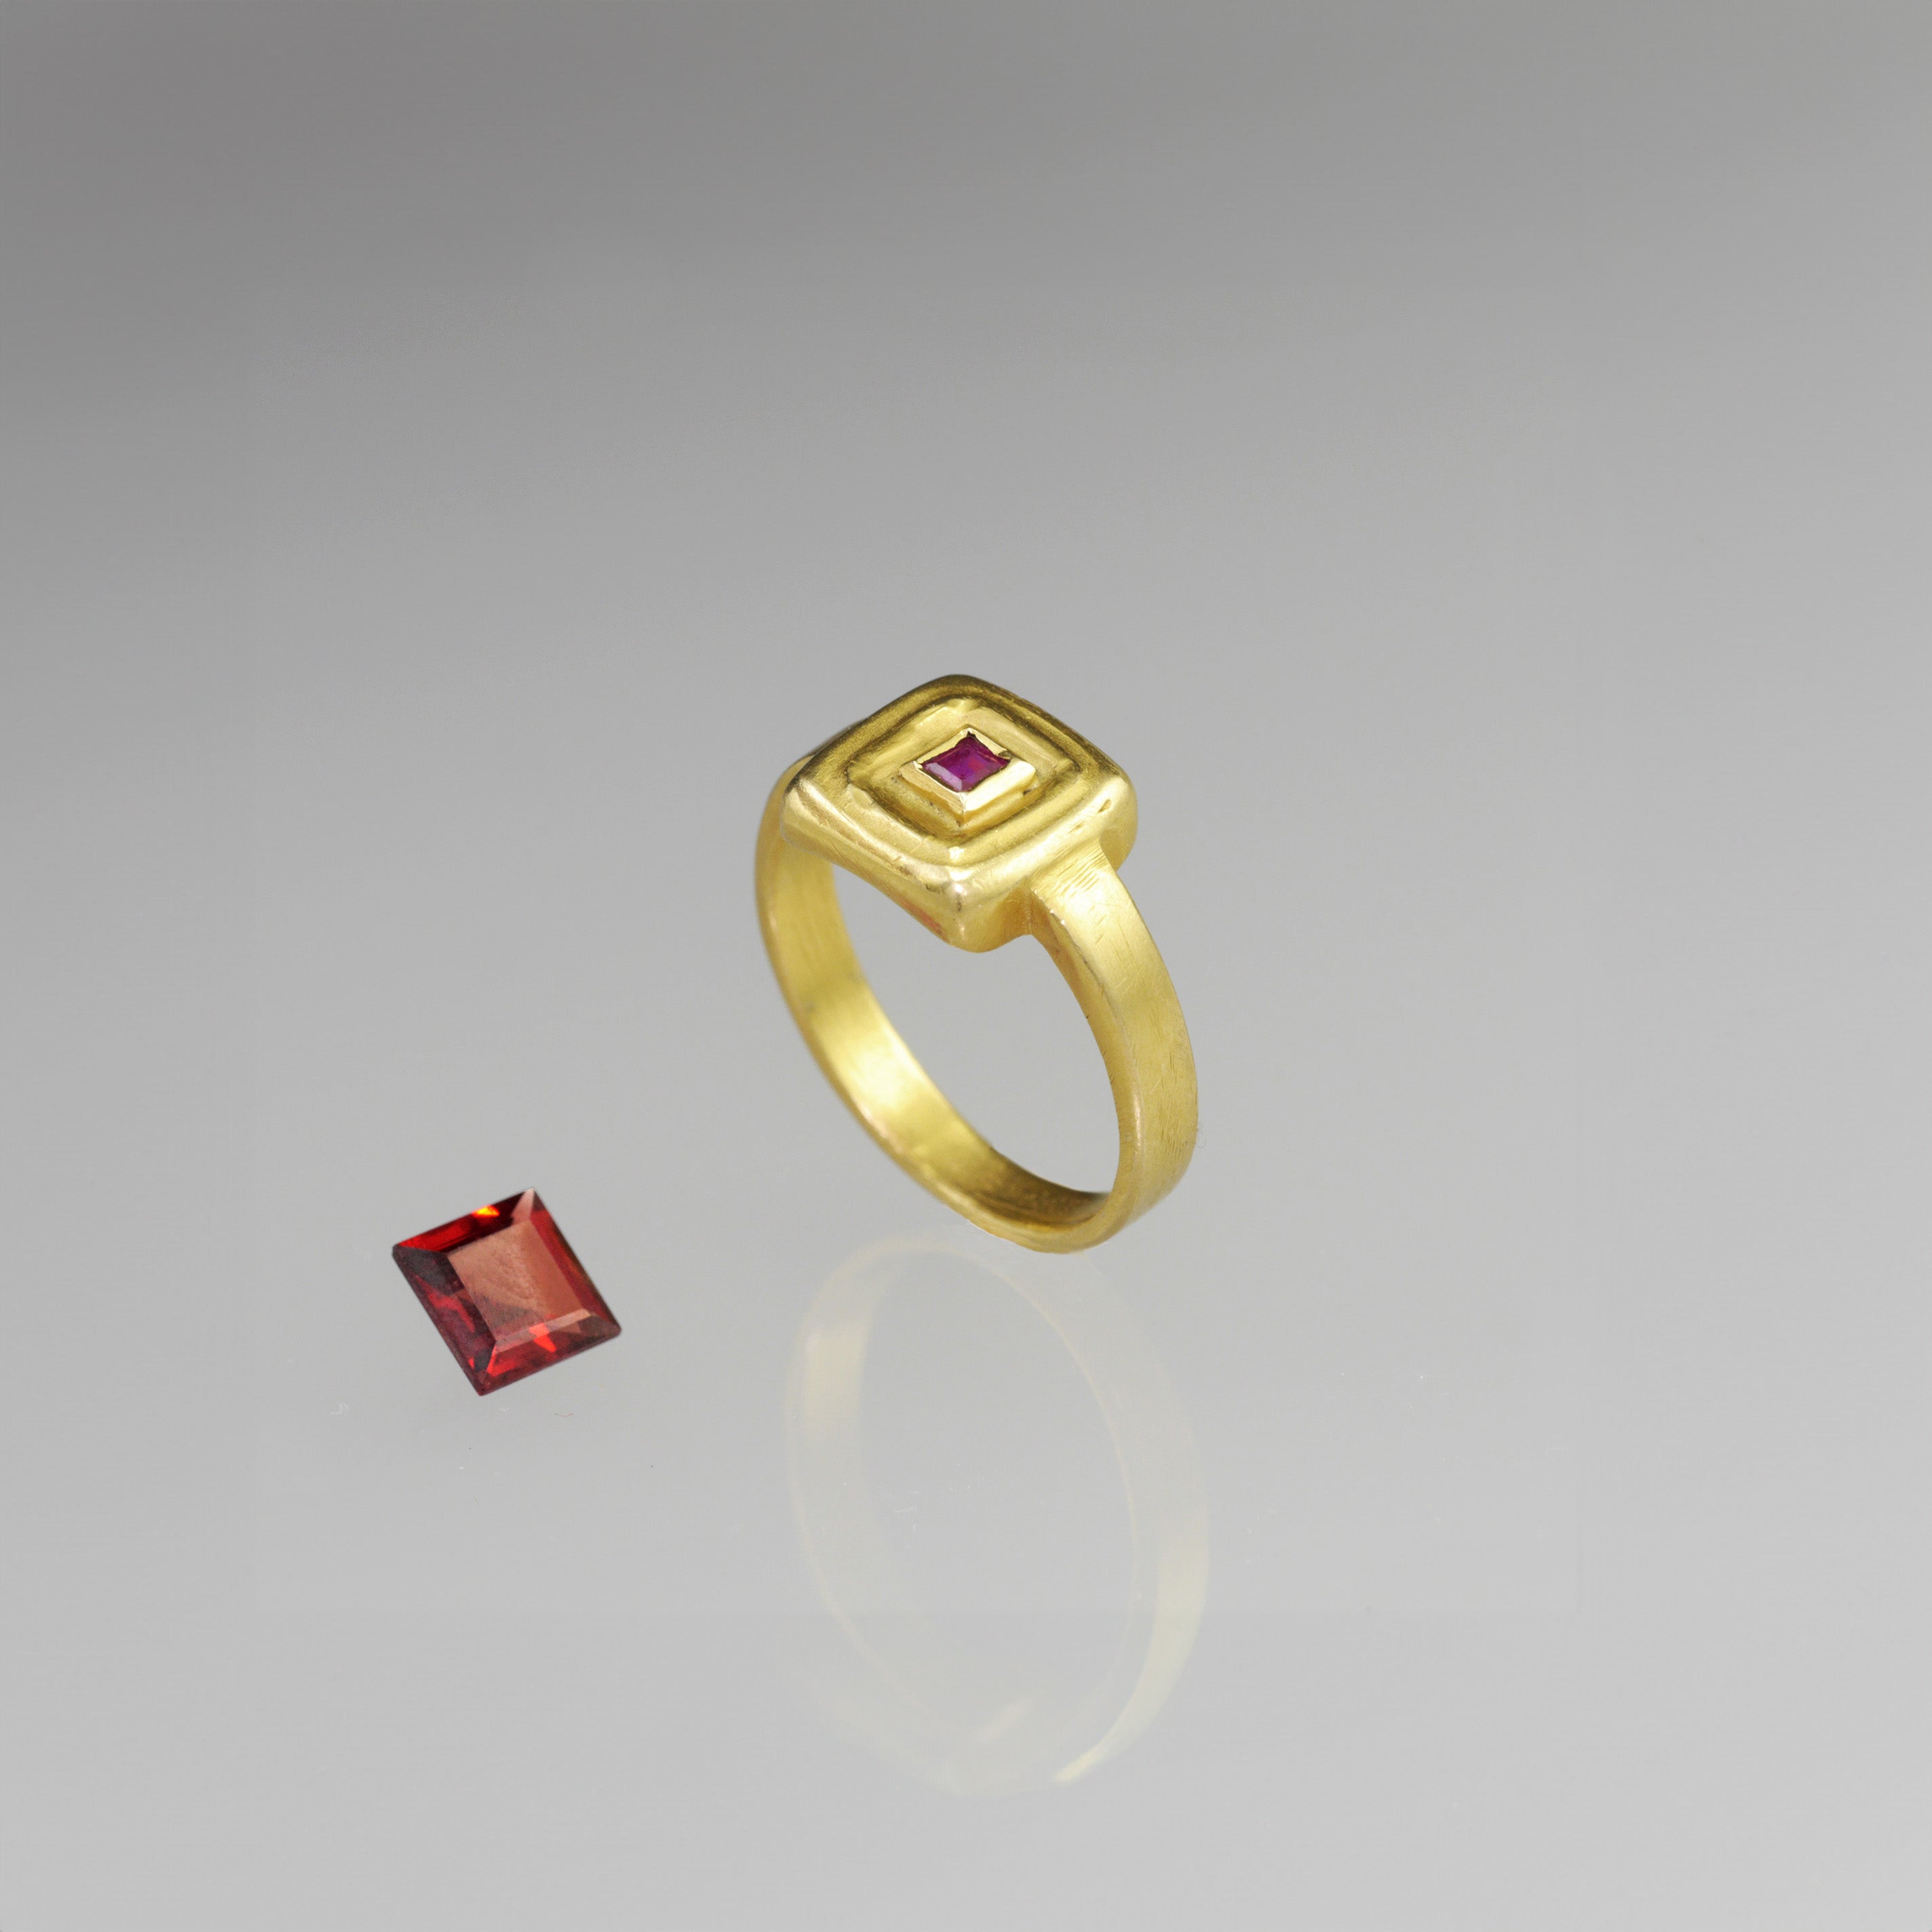 Top view of Handcrafted 18k Gold ring featuring a square Ruby set atop a square surface, evoking the ancient Egyptian era's golden jewelry of the Pharaohs.